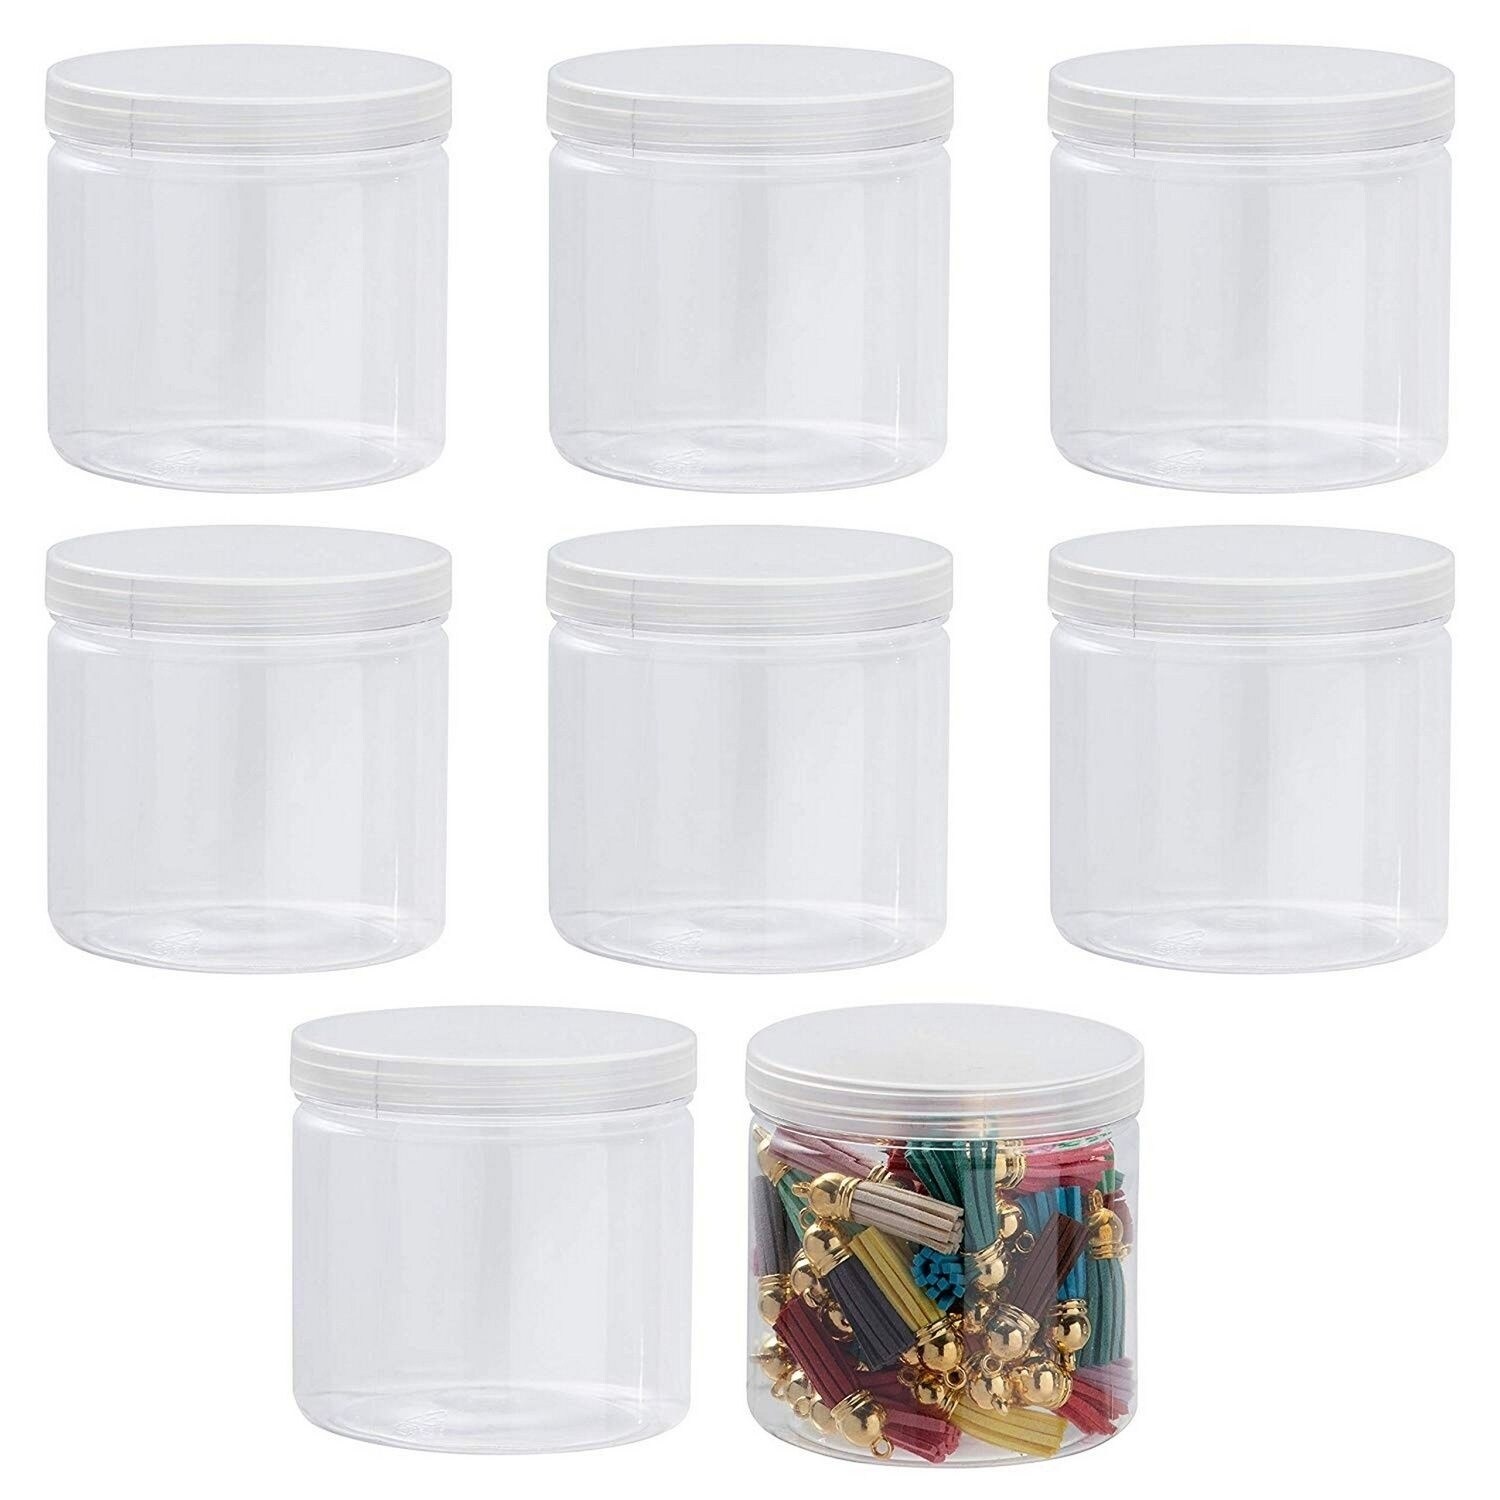 White Lid . 20 Pieces 2 oz Clear Empty Slime Storage Containers Slime Jars with Lids for Little Arts and Crafts and Household Supplies 